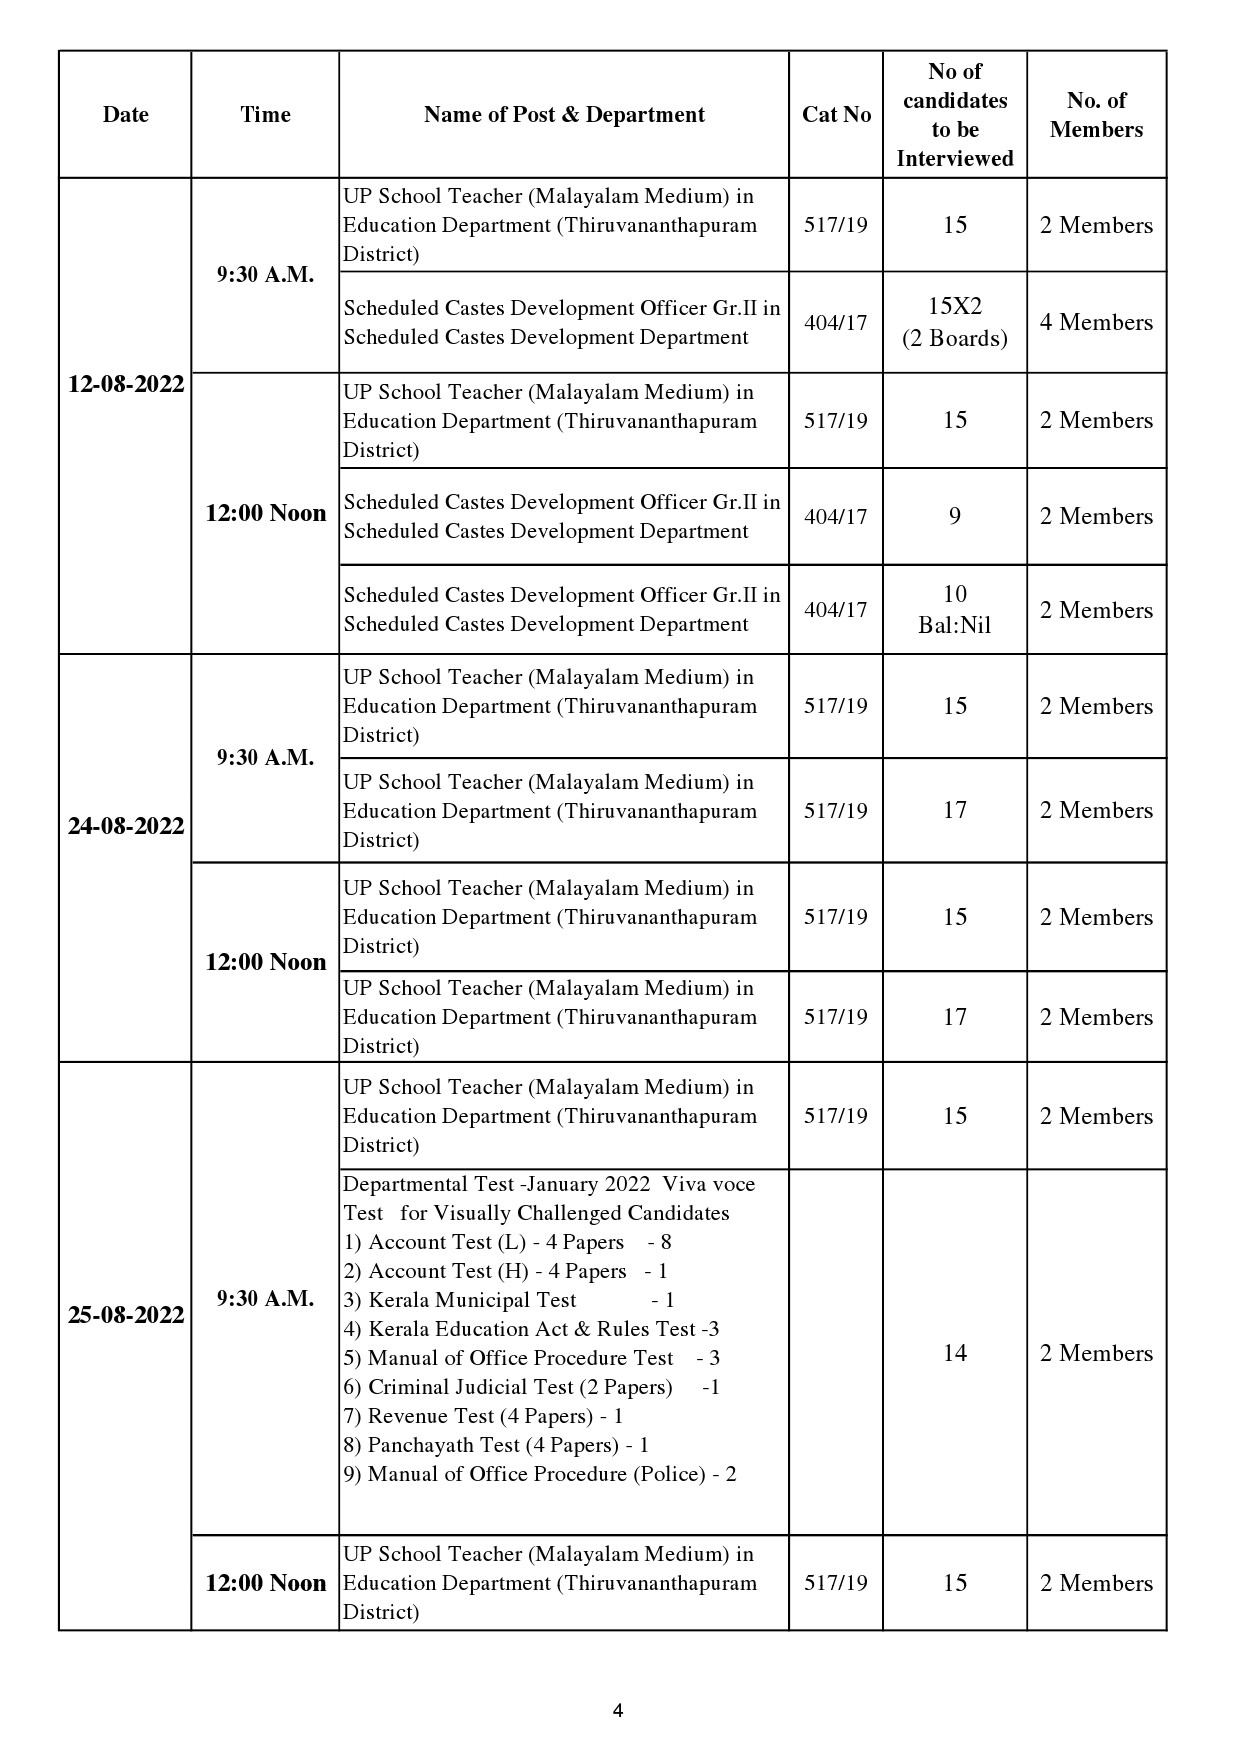 Revised Interview Programme For The Month Of August 2022 - Notification Image 4